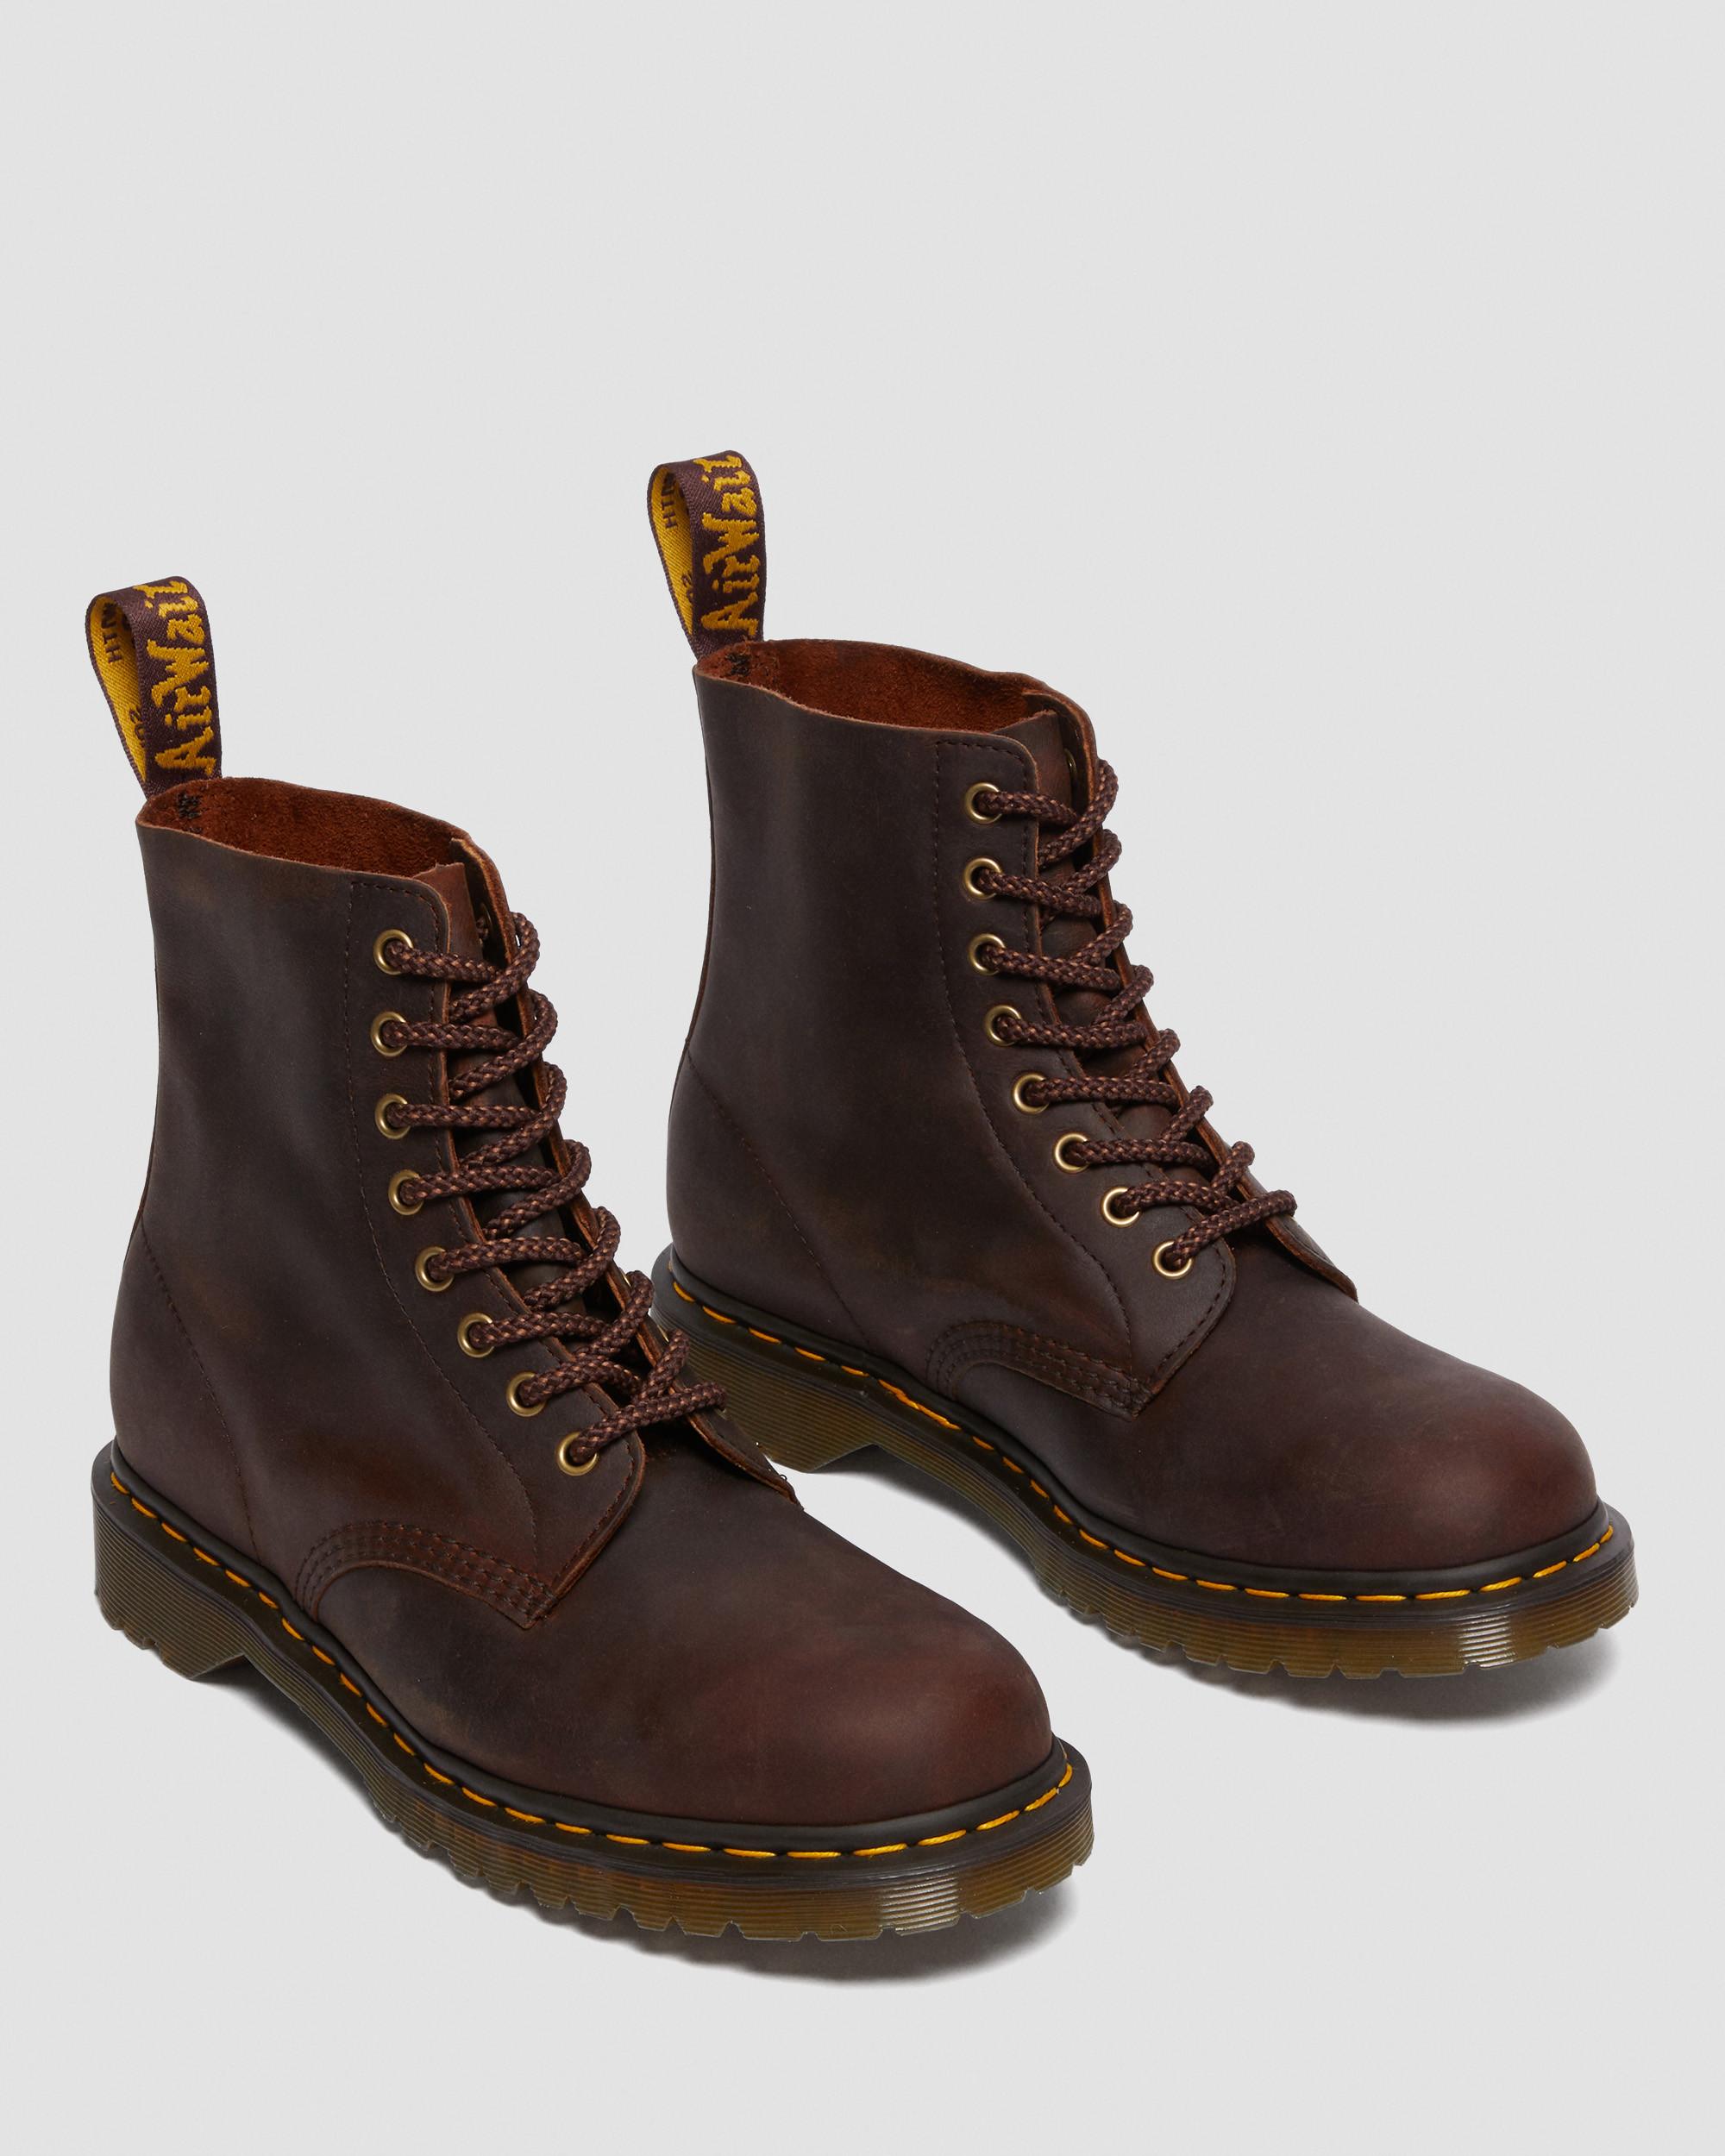 Inaccesible Narabar Bonito 1460 Pascal Waxed Full Grain Leather Lace Up Boots | Dr. Martens